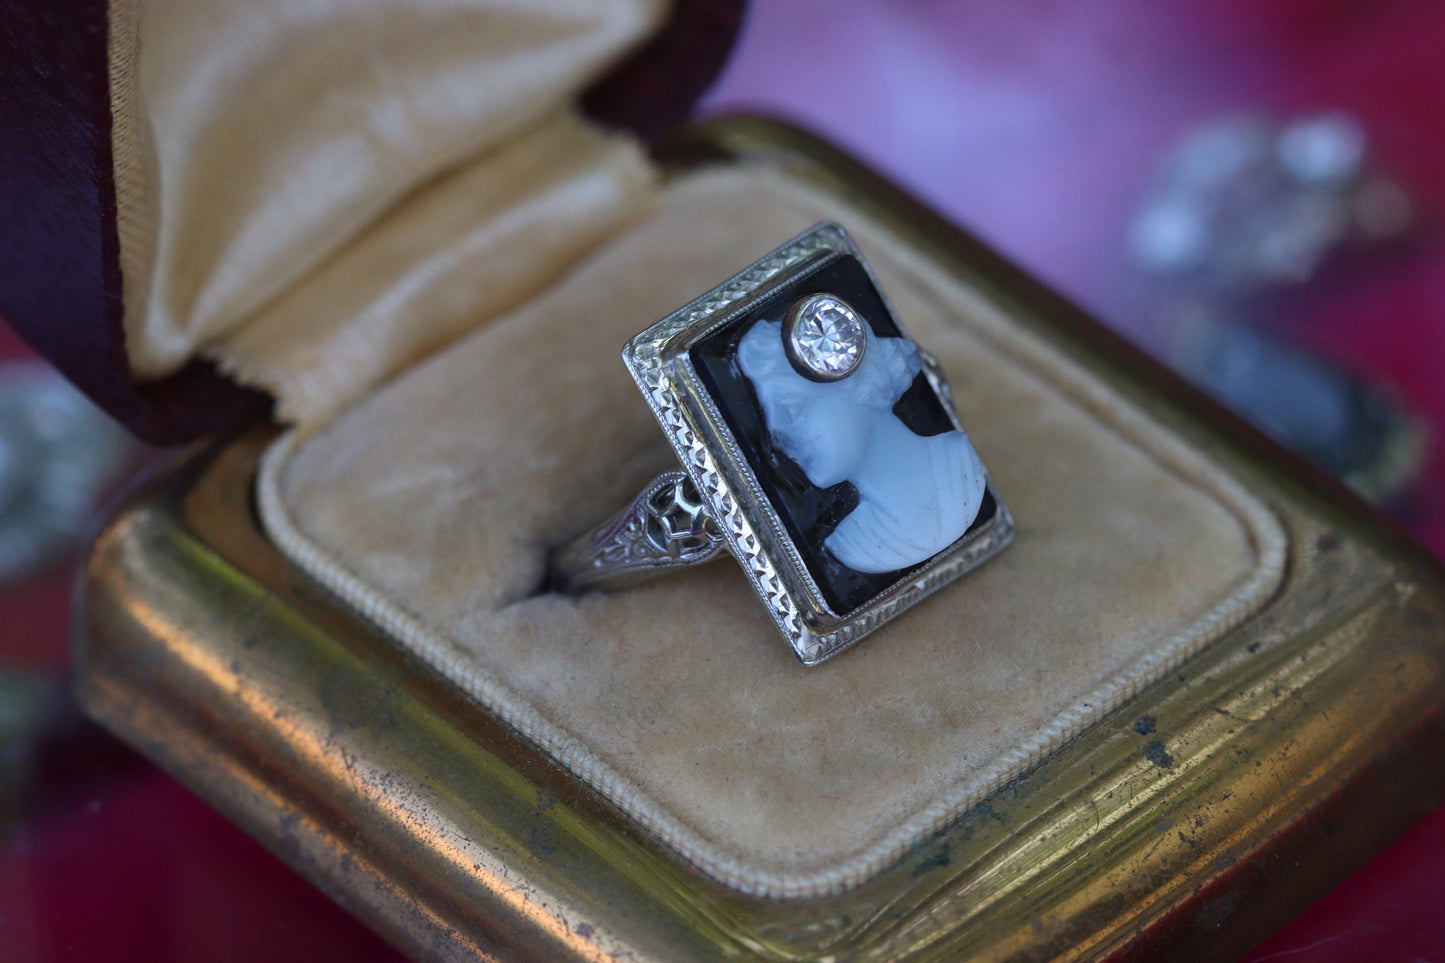 14k white gold onyx cameo ring with .17 old mine cut diamond size 5.25 sizable